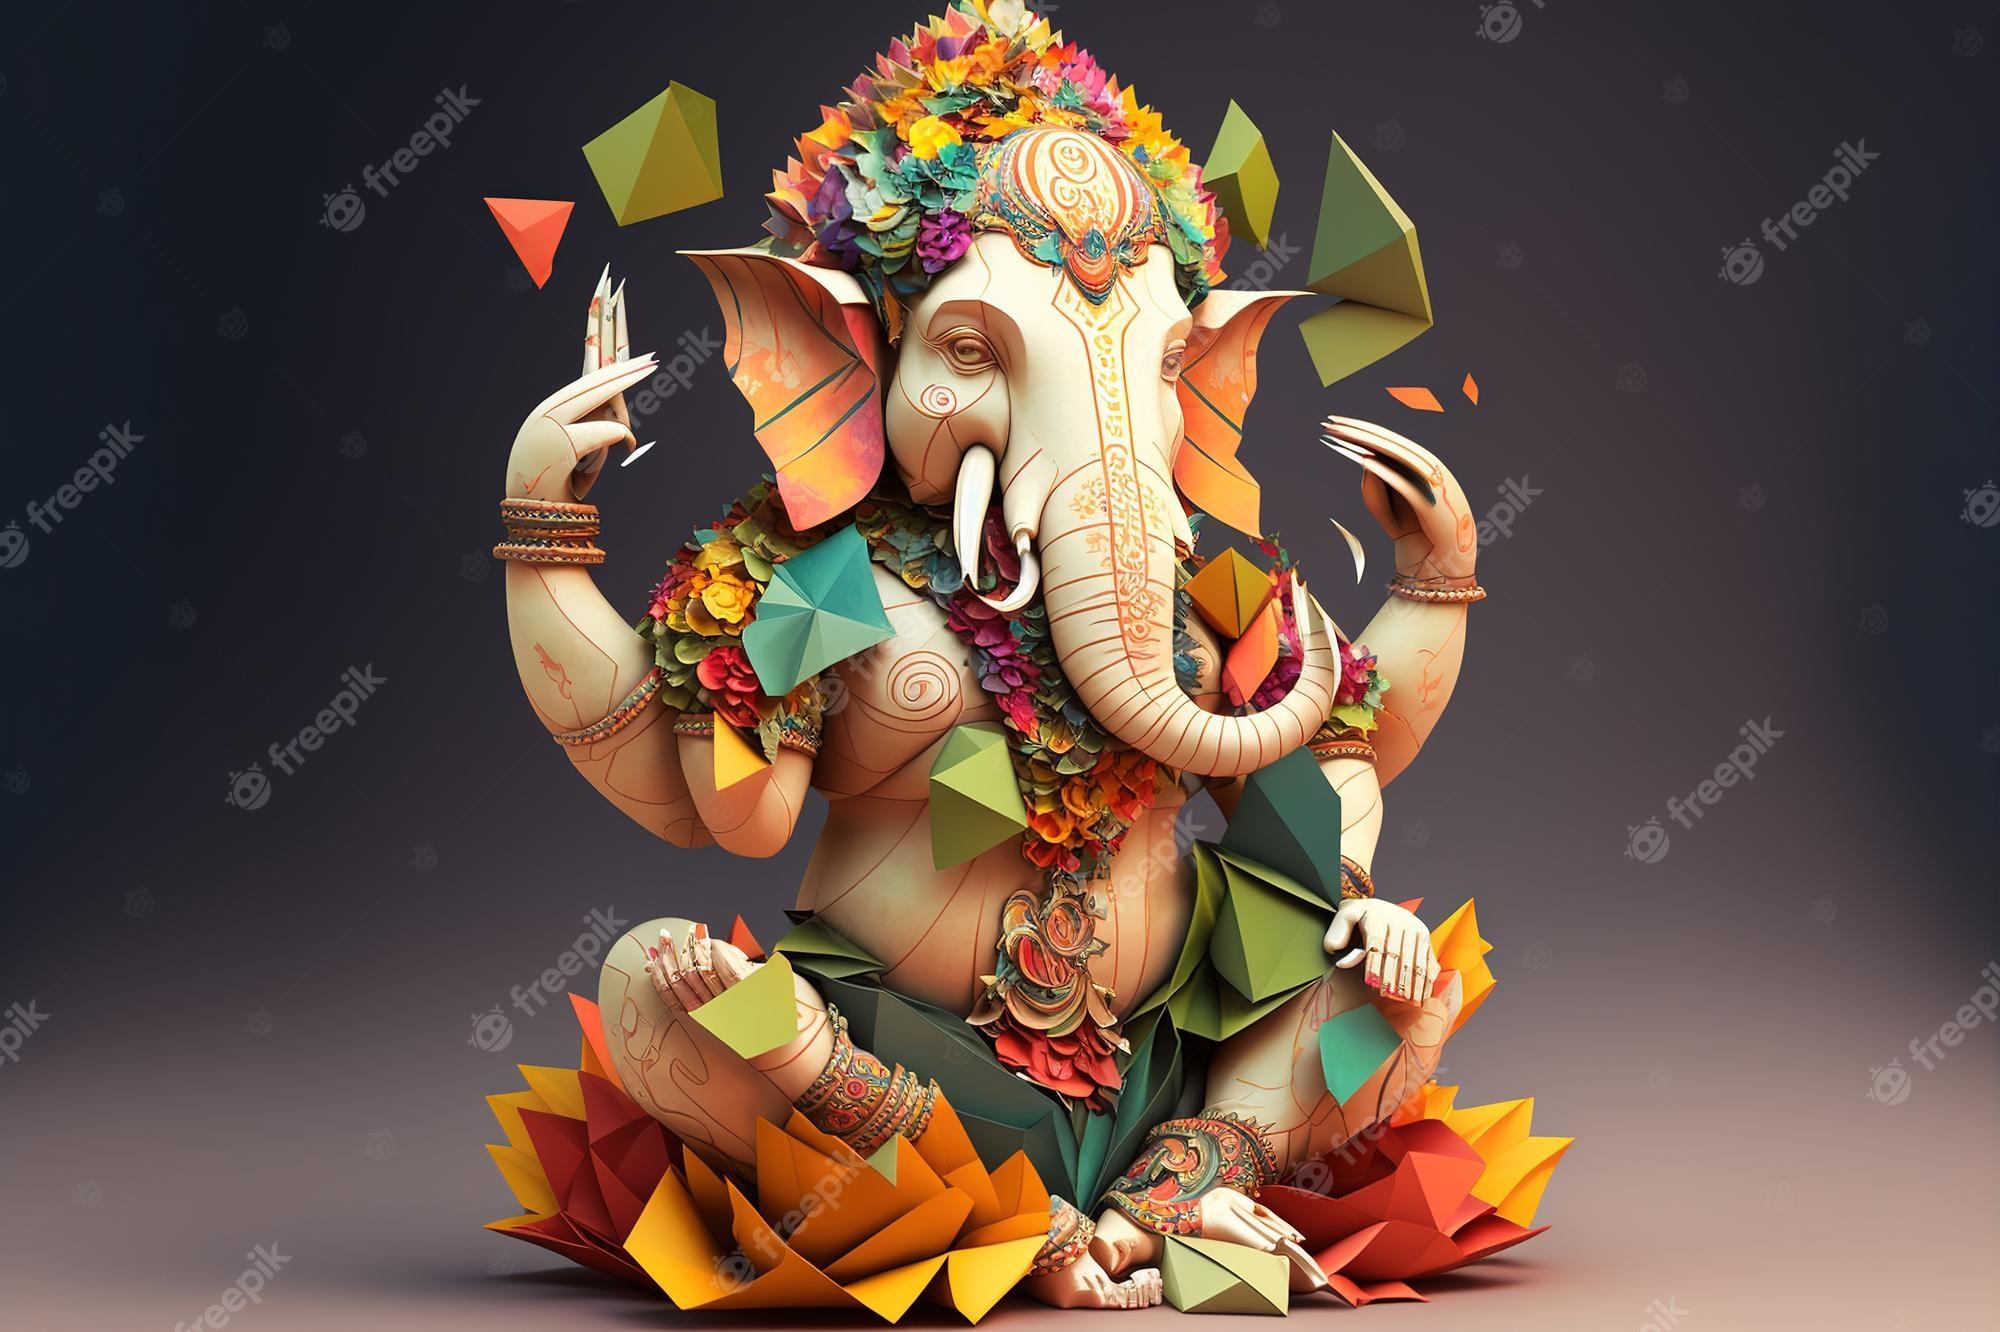 Premium Photo Origami Of Indian God Ganesh In Colorful Flowers Craft